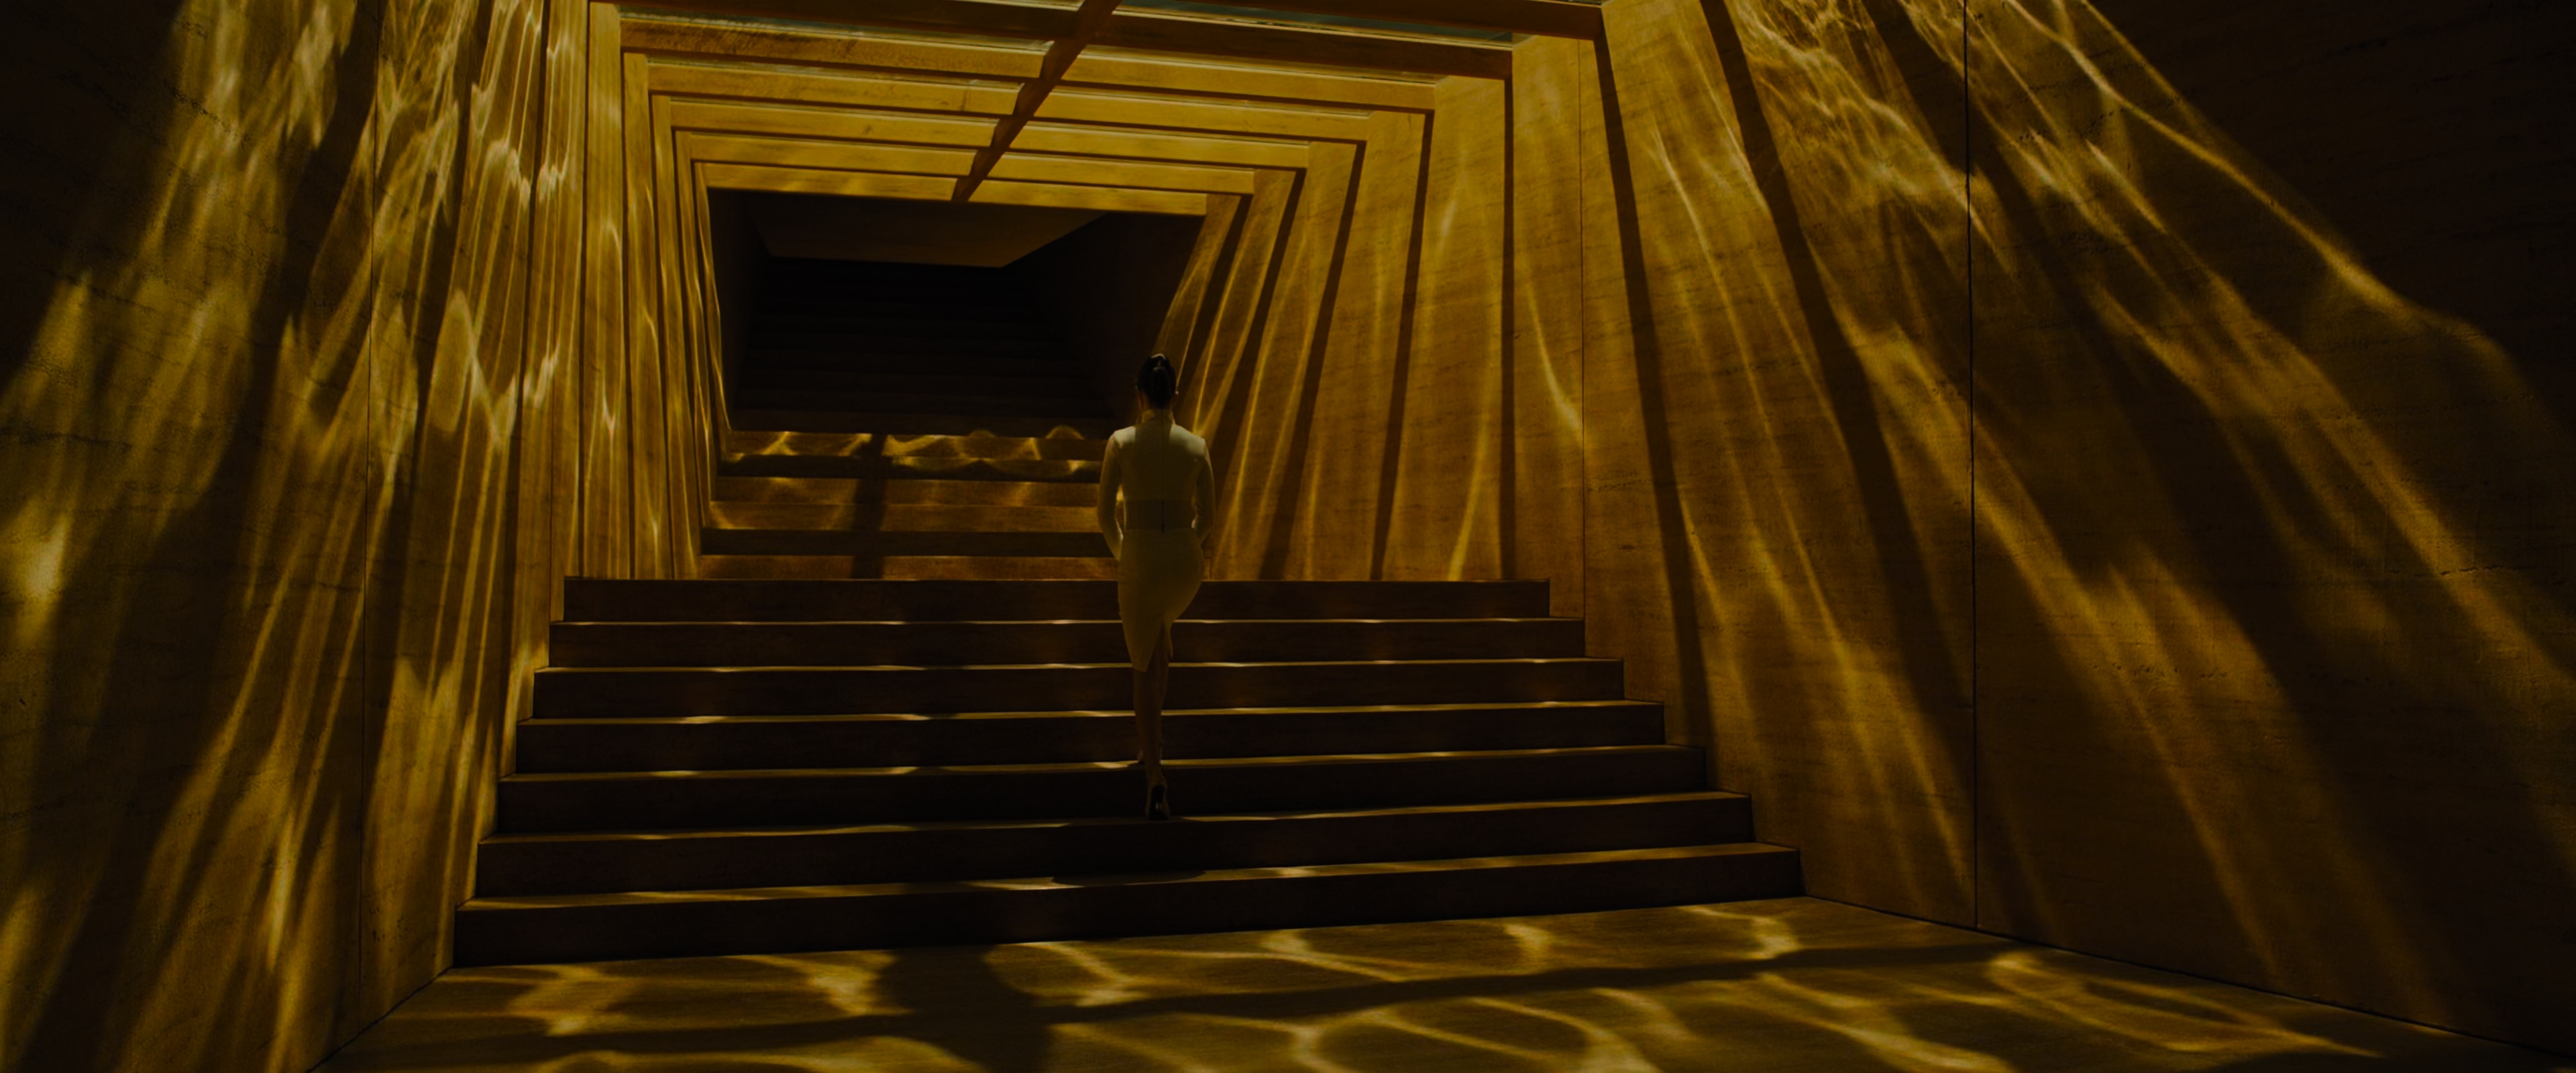 Luv-wearing-white-pencil-skirt-ascending-Wallace-Corp-staircase-basking-in-gold-light